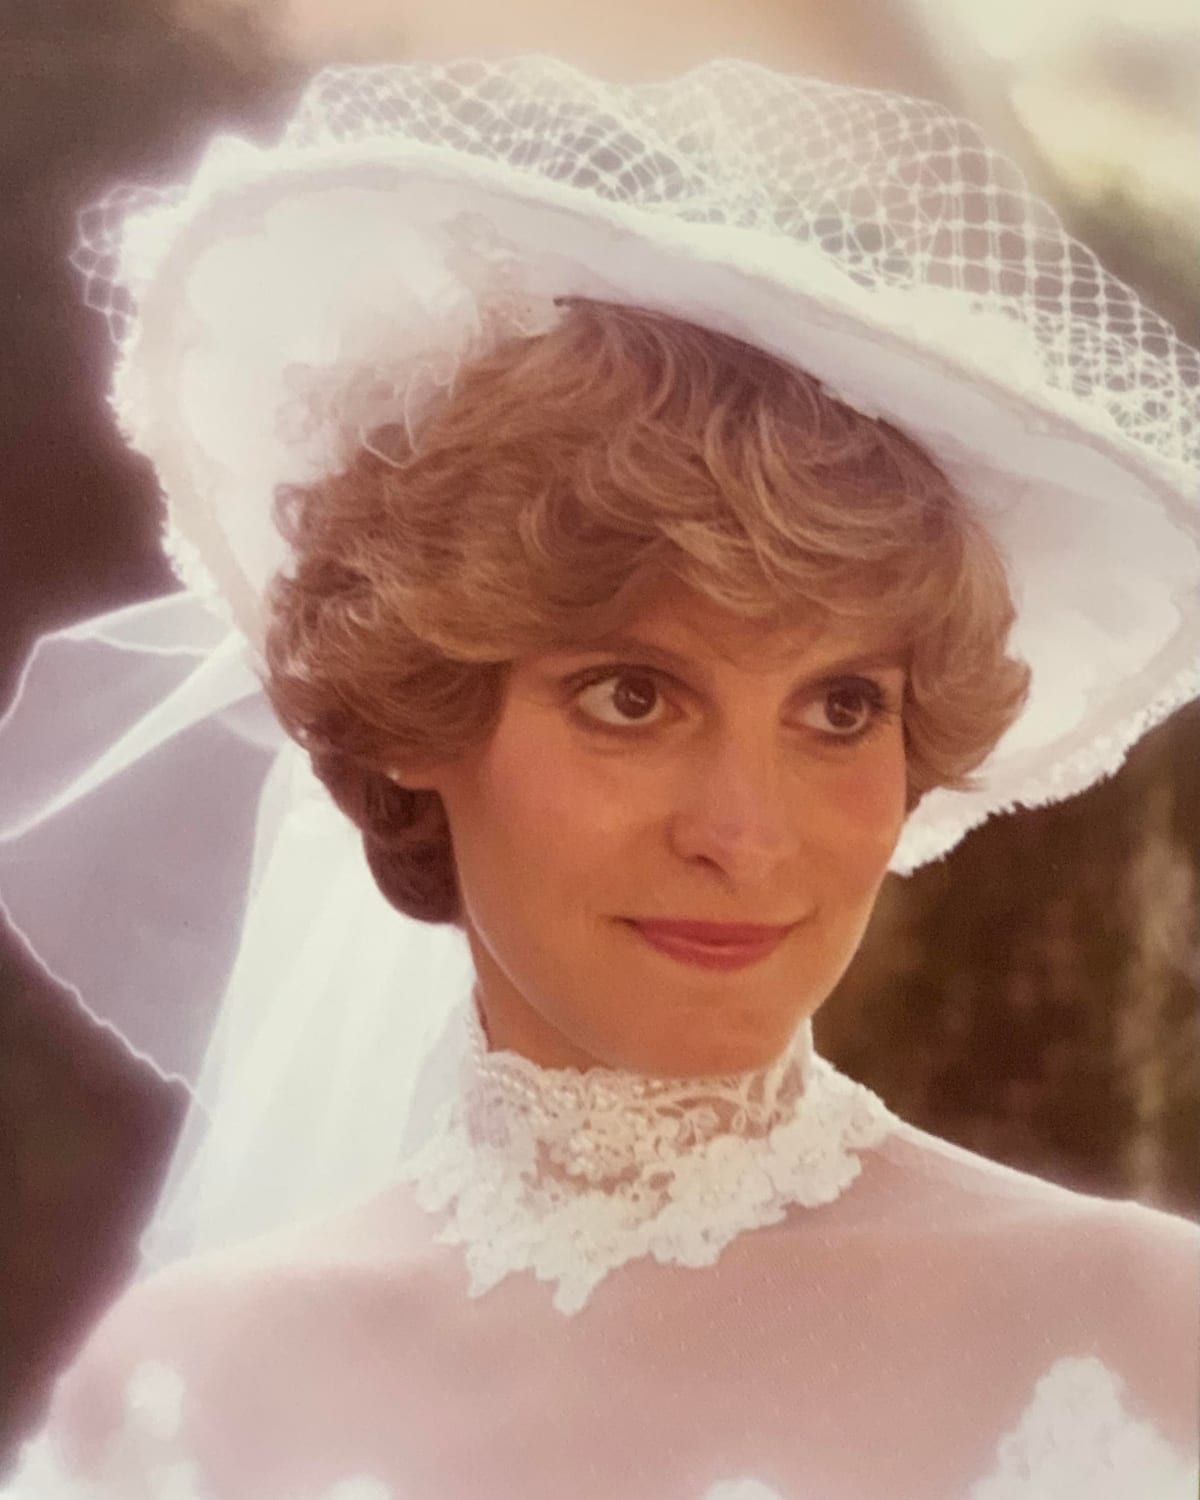 My mother on her wedding day in 1983. Everyone thought she looked so much like Princess Diana.